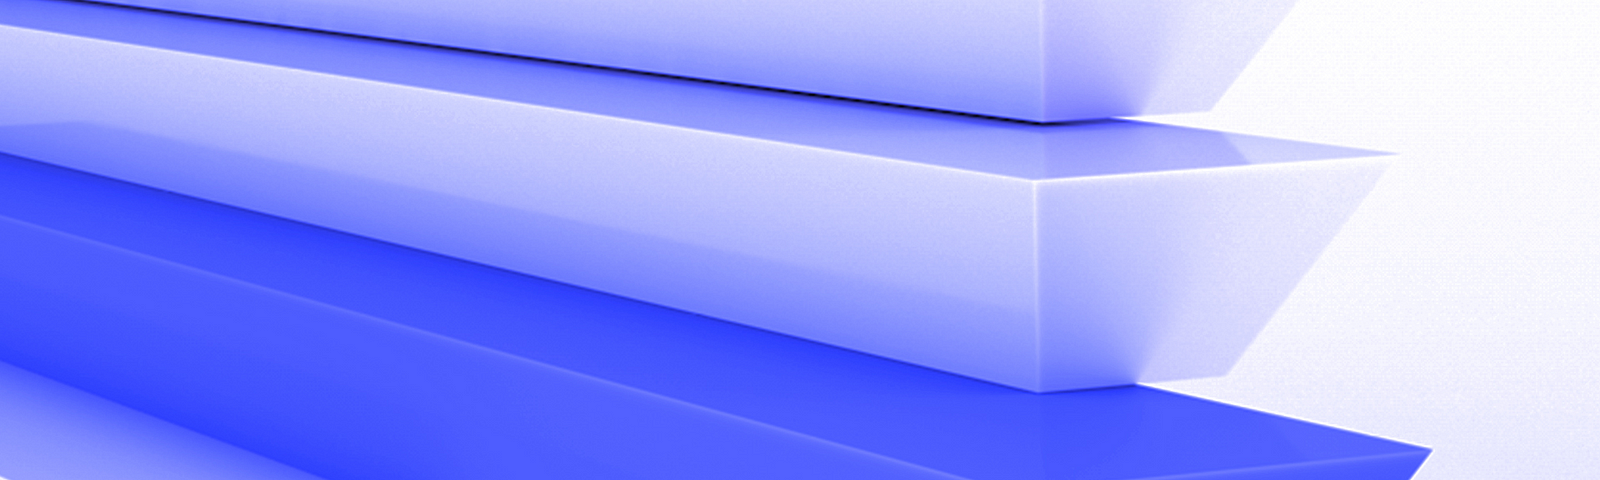 This image depicts a series of three elongated, rectangular, and gradient-colored bars stacked in a staggered arrangement. The bars transition from a lighter blue at the top to a deeper blue at the bottom, with sharp, clean edges and a glossy finish. The background is a light gradient that complements the bars’ colors.